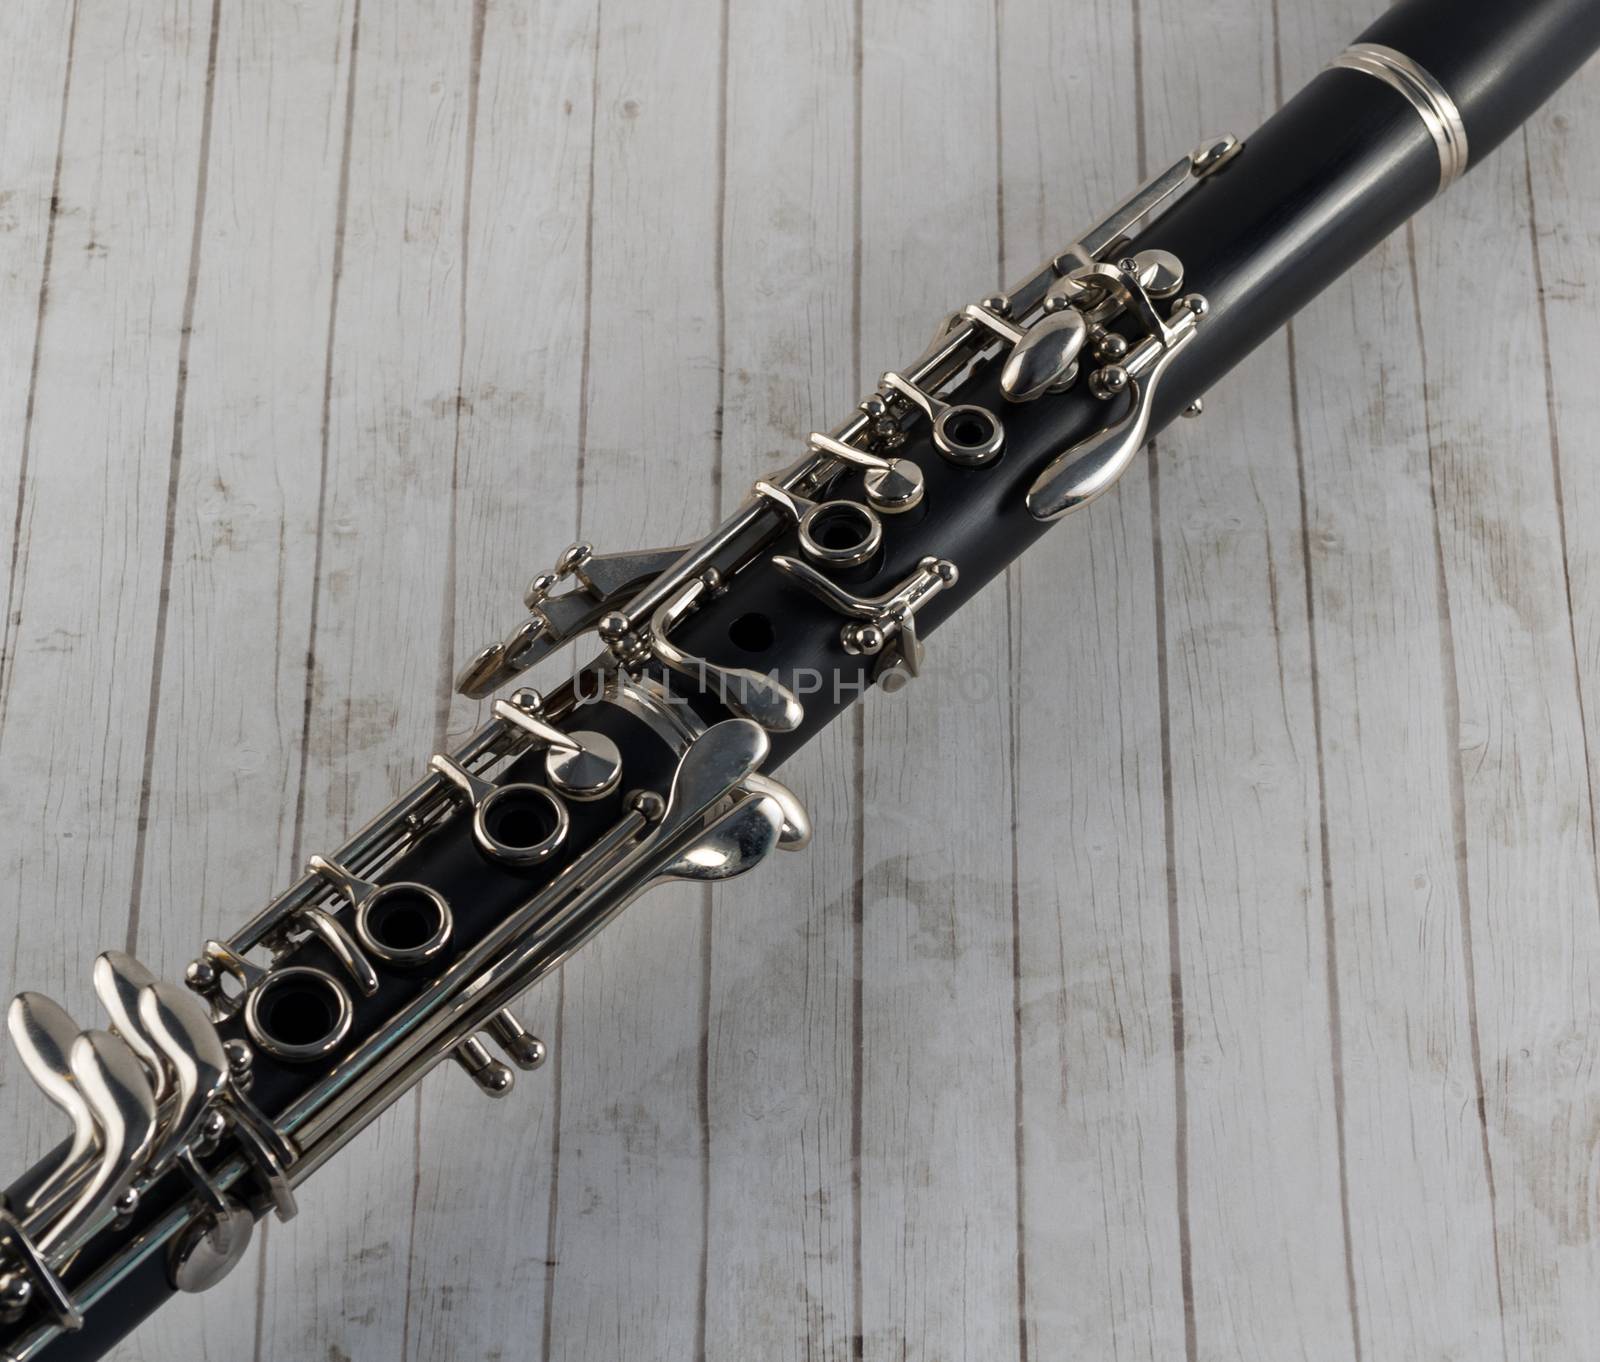 Black Clarinet Closeup by krisblackphotography